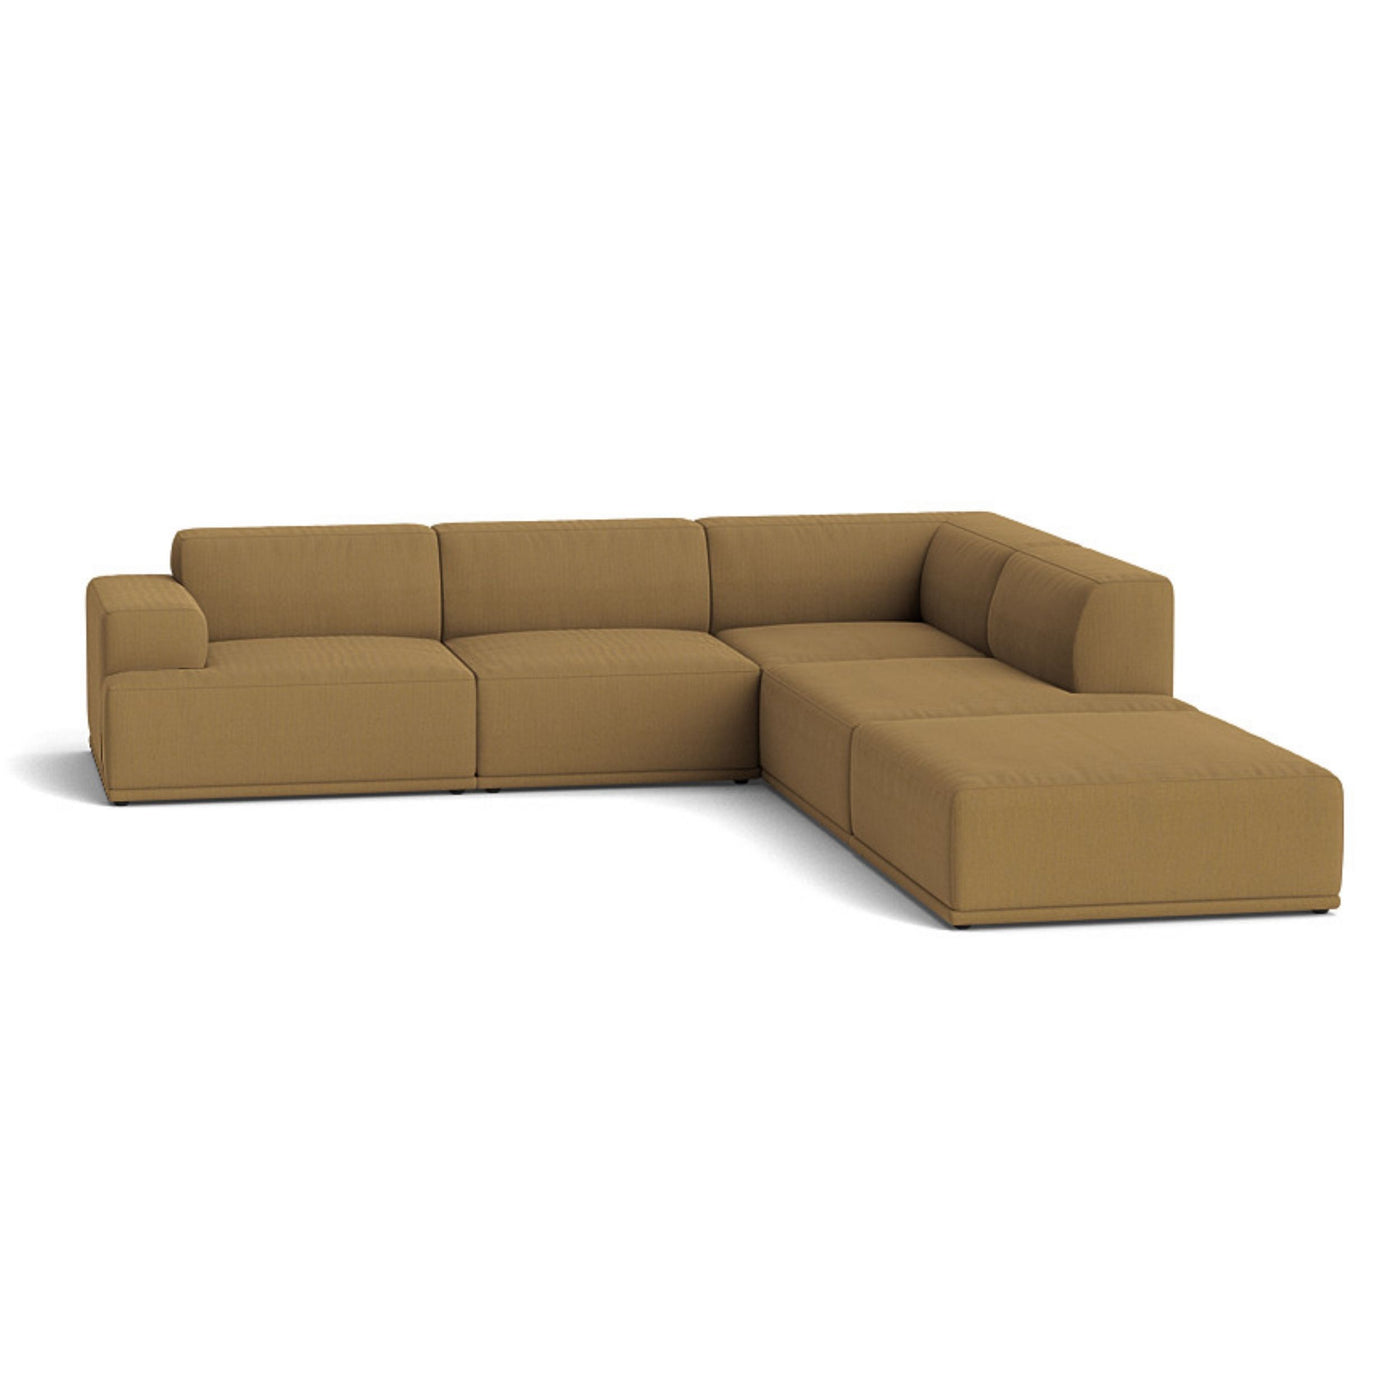 Muuto Connect Soft Modular Corner Sofa, configuration 2. Made-to-order from someday designs. #colour_re-wool-448